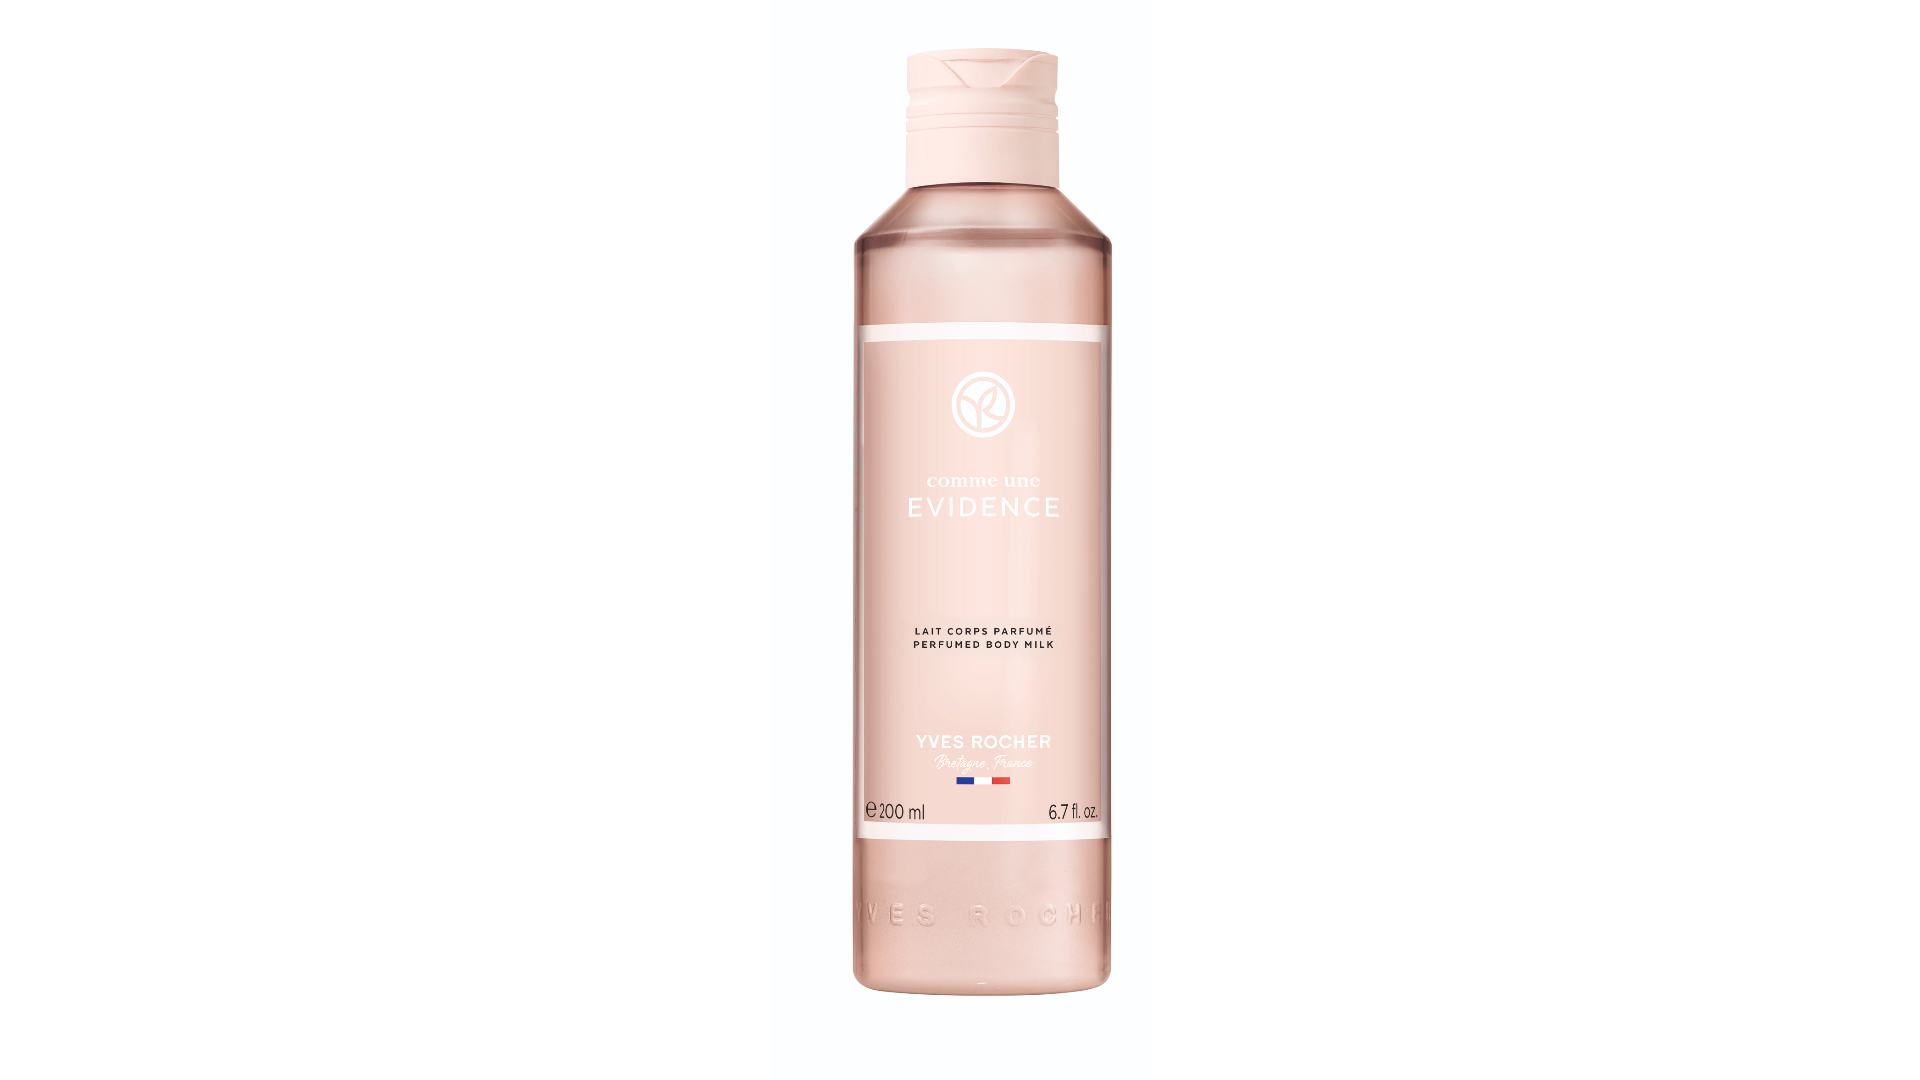 COMME UNE EVIDENCE BODY LOTION TUBE 150ML